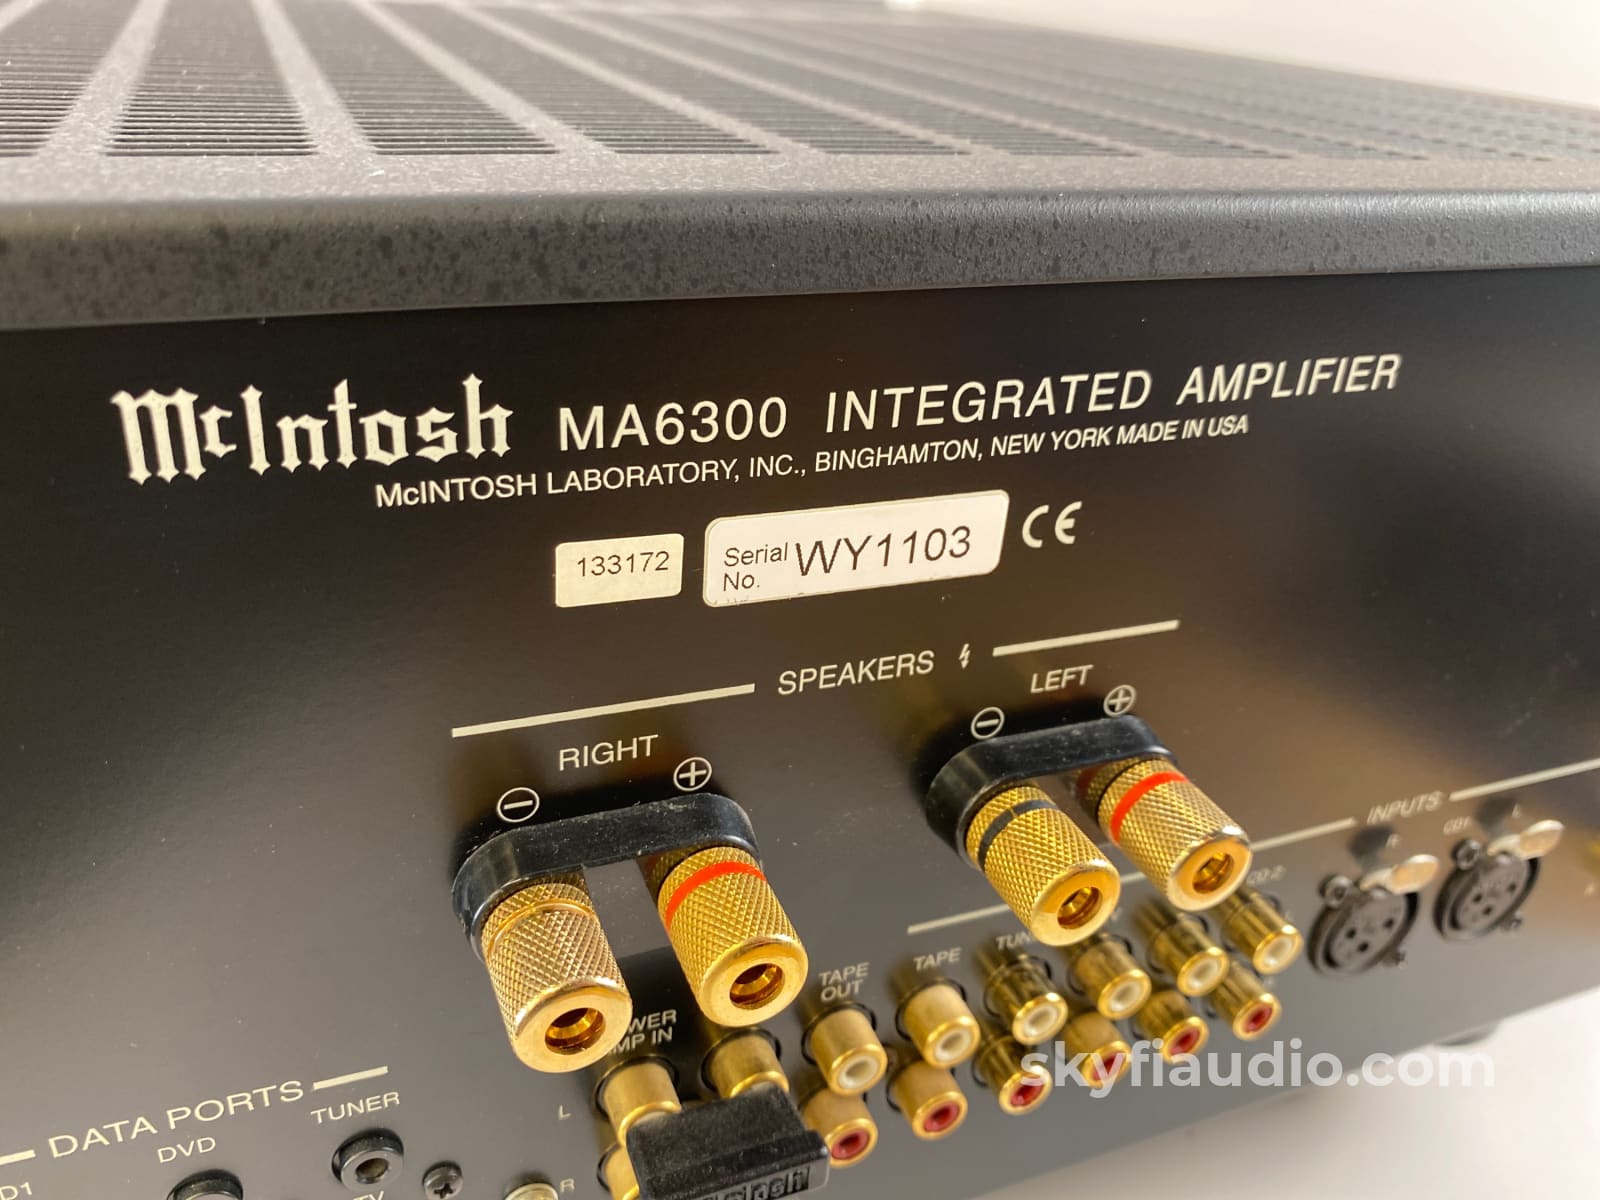 Mcintosh Ma6300 Integrated Amplifier - All Analog With Phono Input Like New And Complete